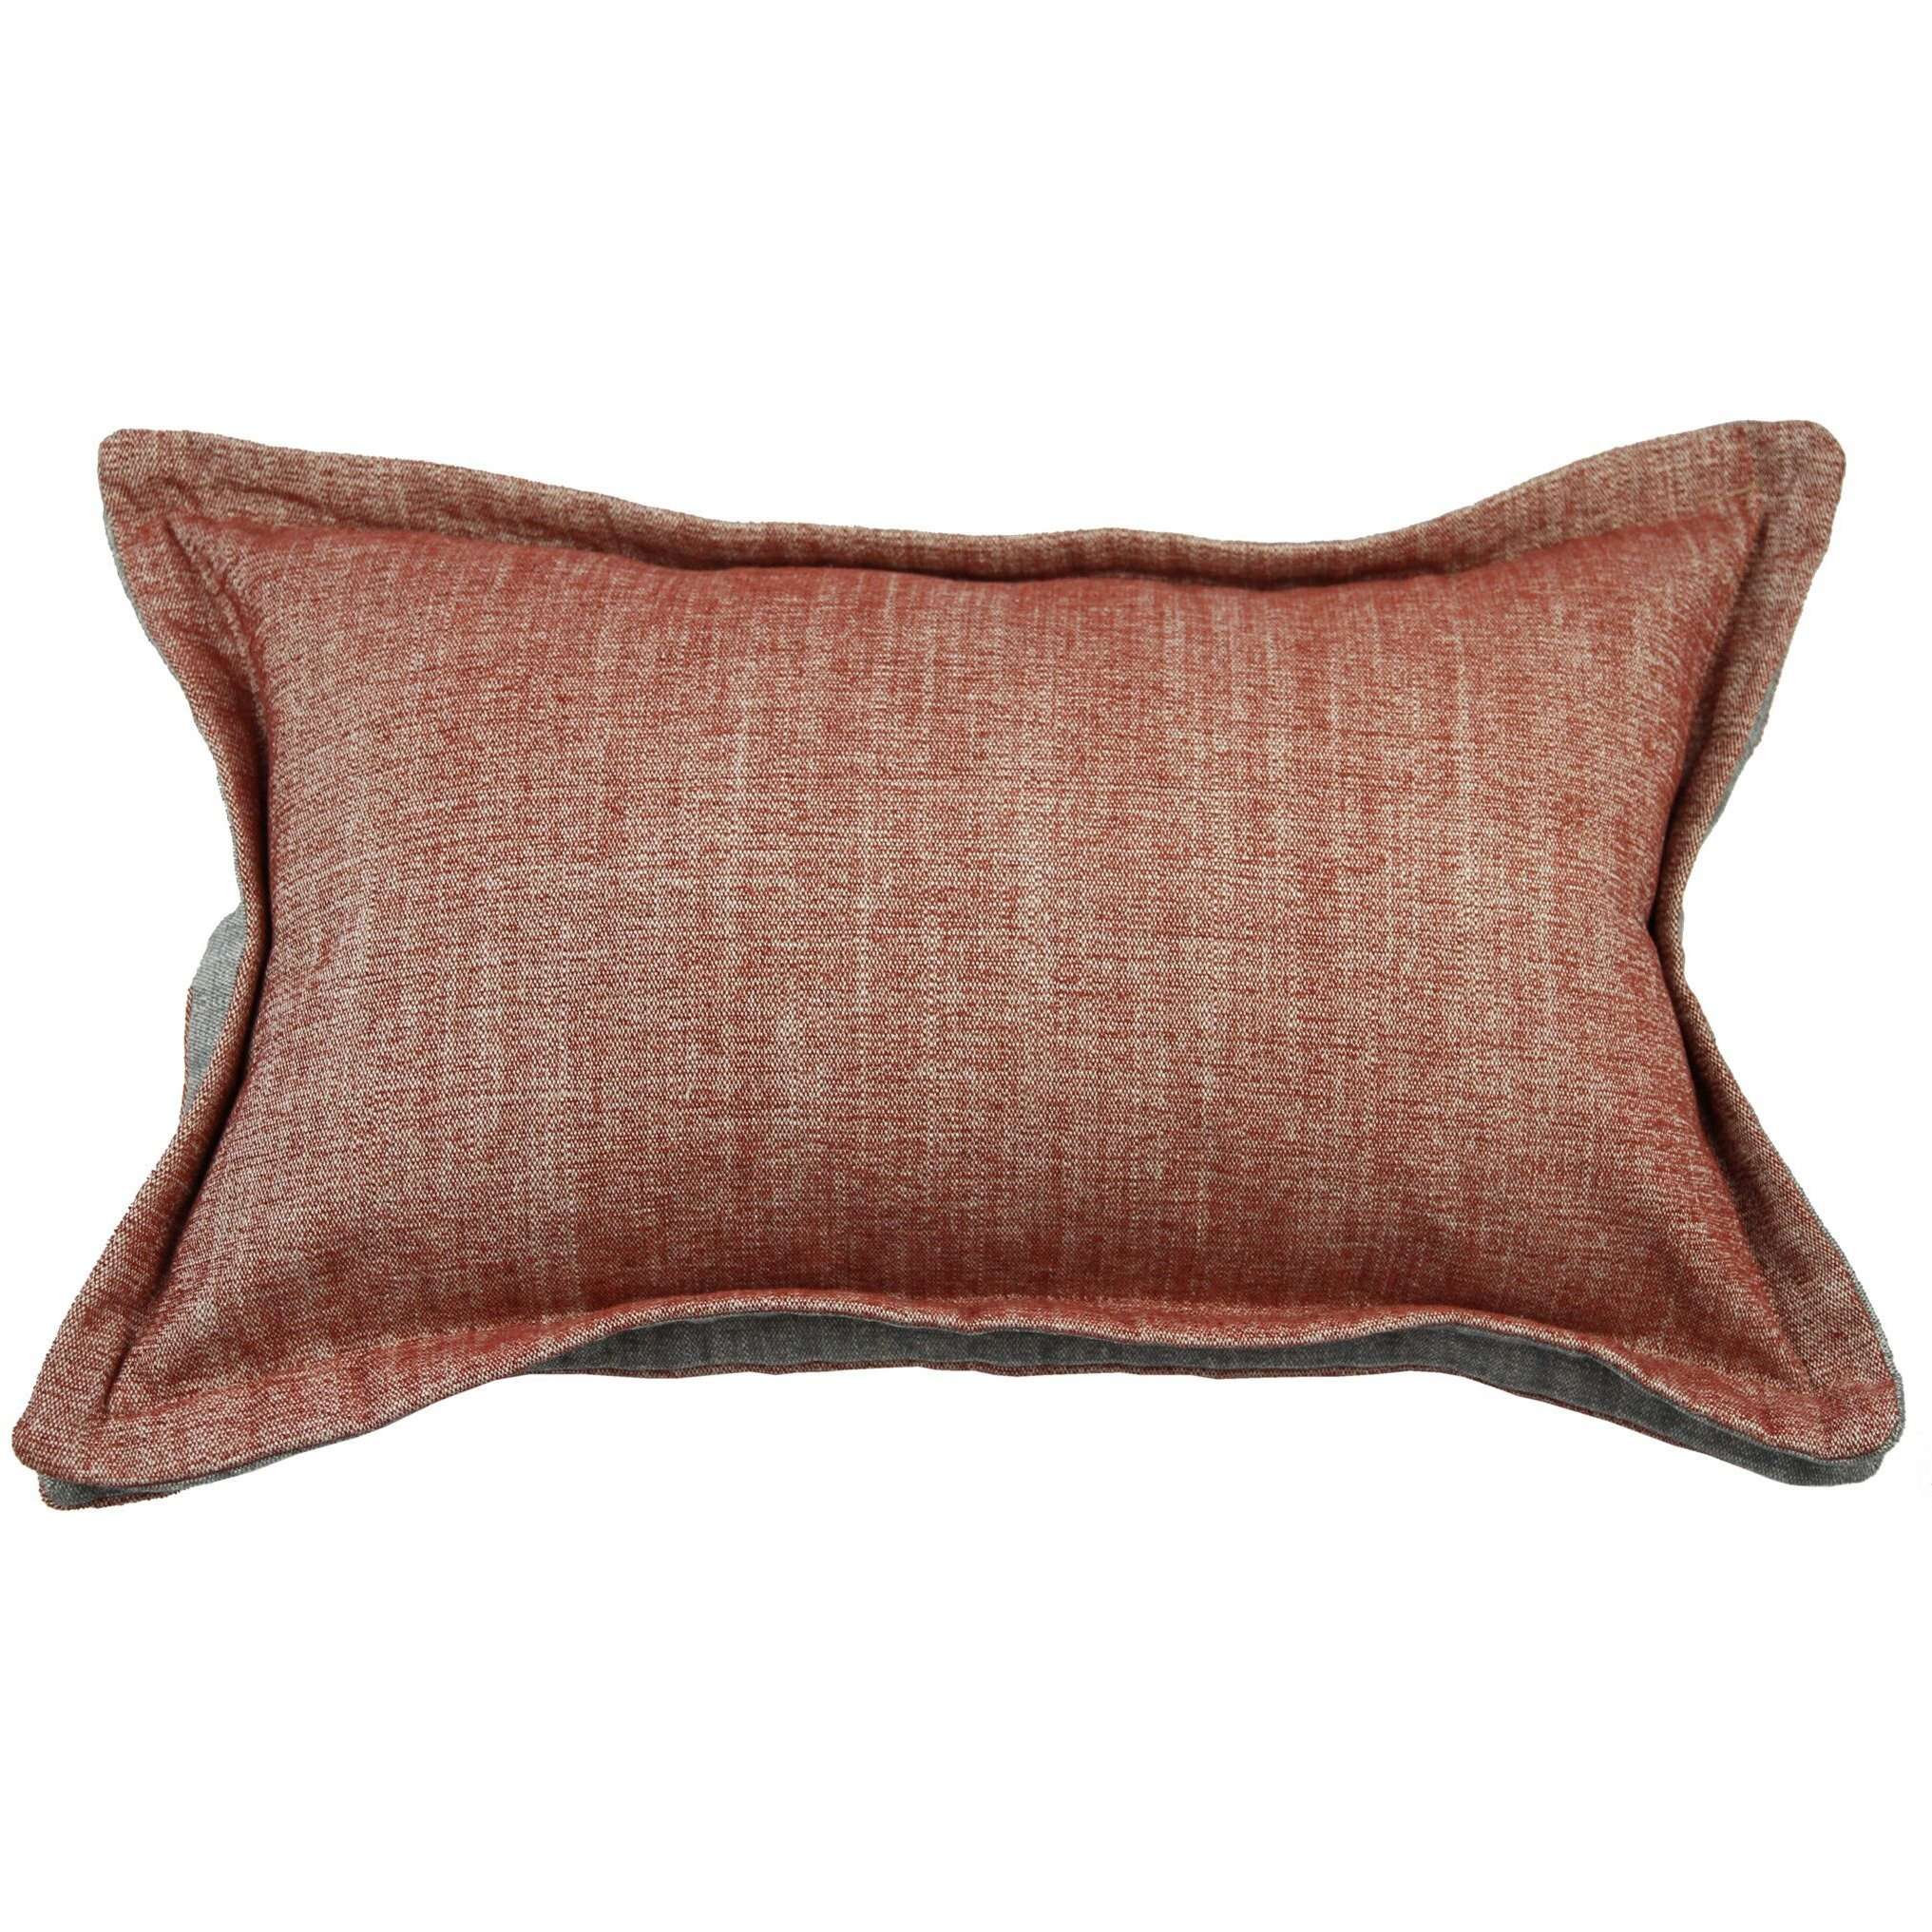 McAlister Textiles Rhumba Accent Burnt Orange + Grey Pillow Pillow Cover Only 50cm x 30cm 